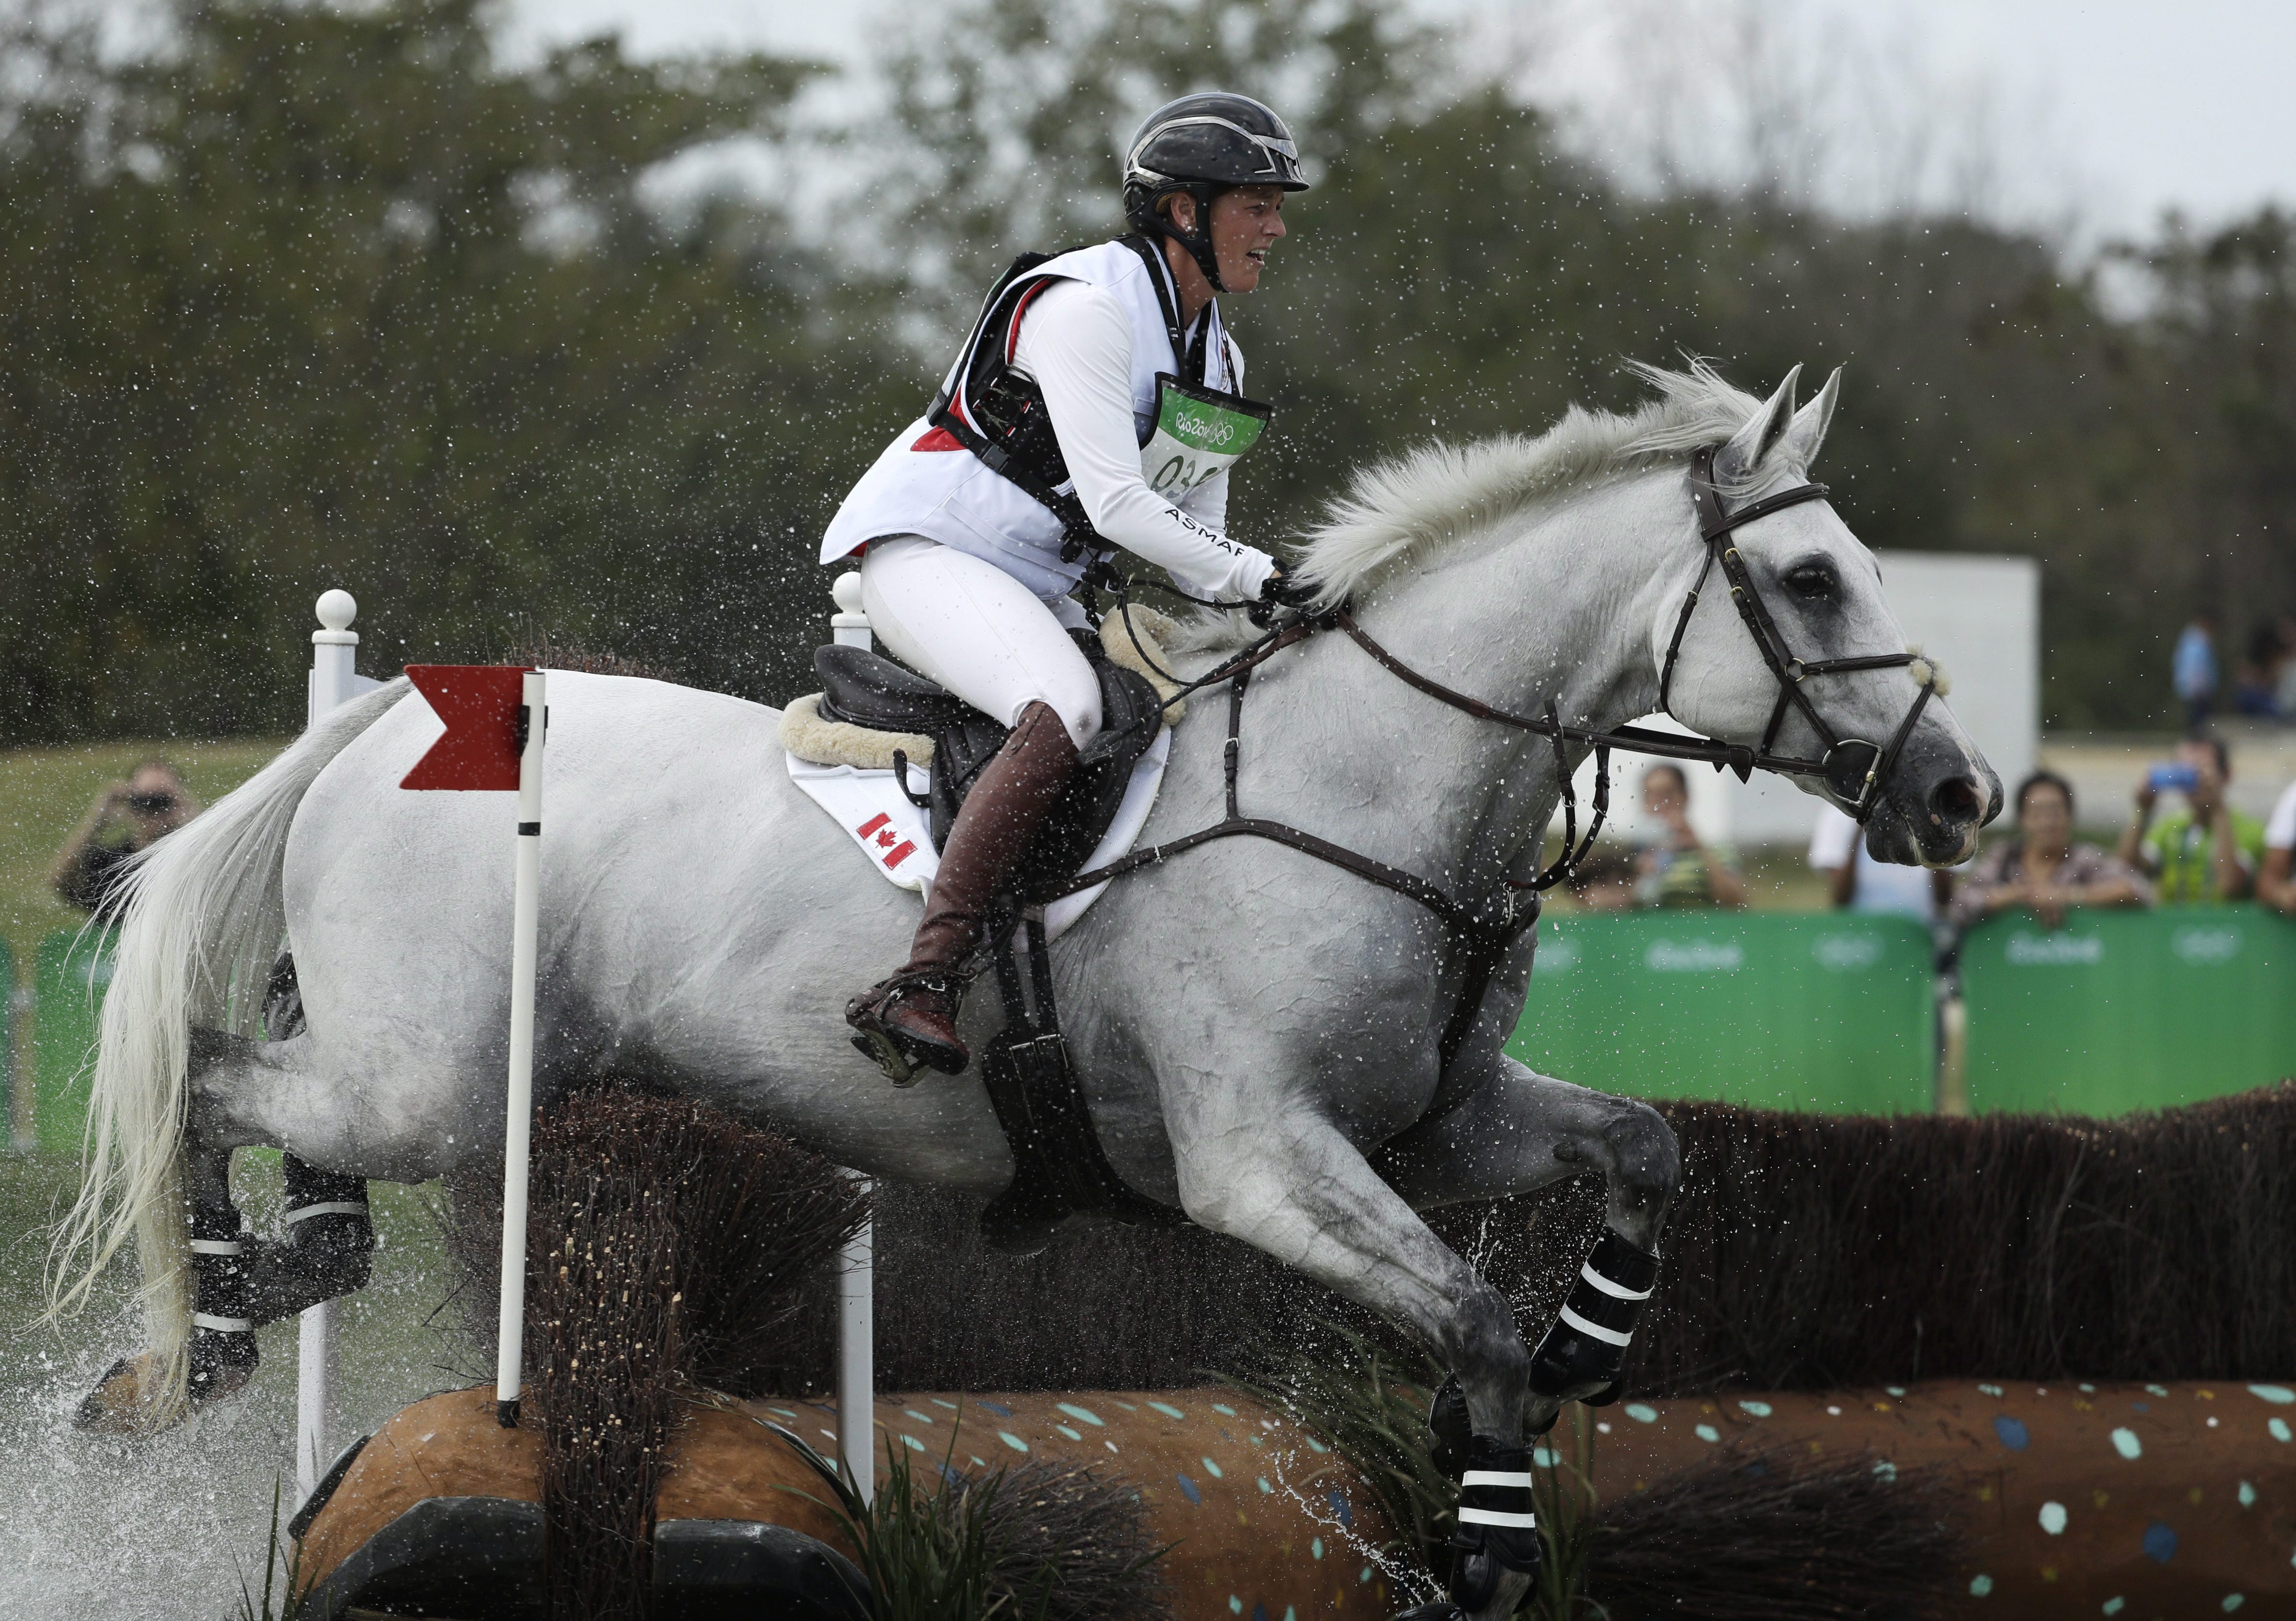 Colleen Loach rides a white horse over a water obstacle in a cross country event